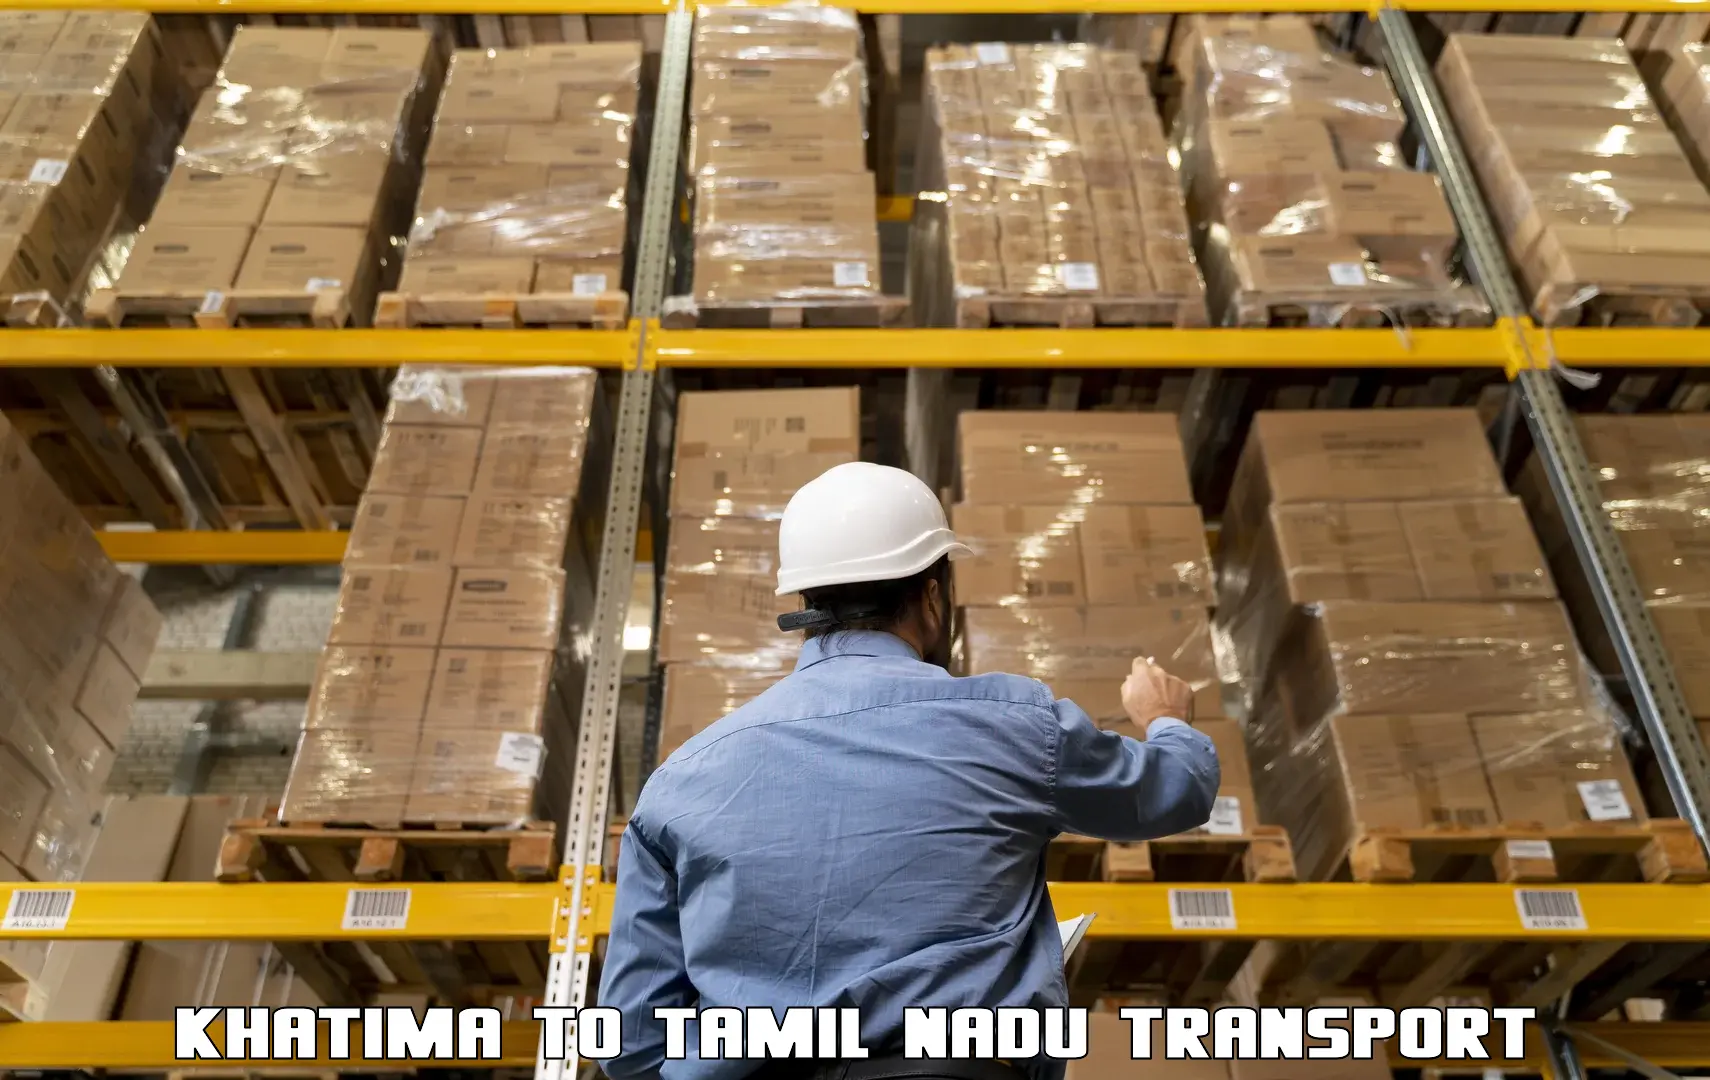 Transportation services in Khatima to Ennore Port Chennai